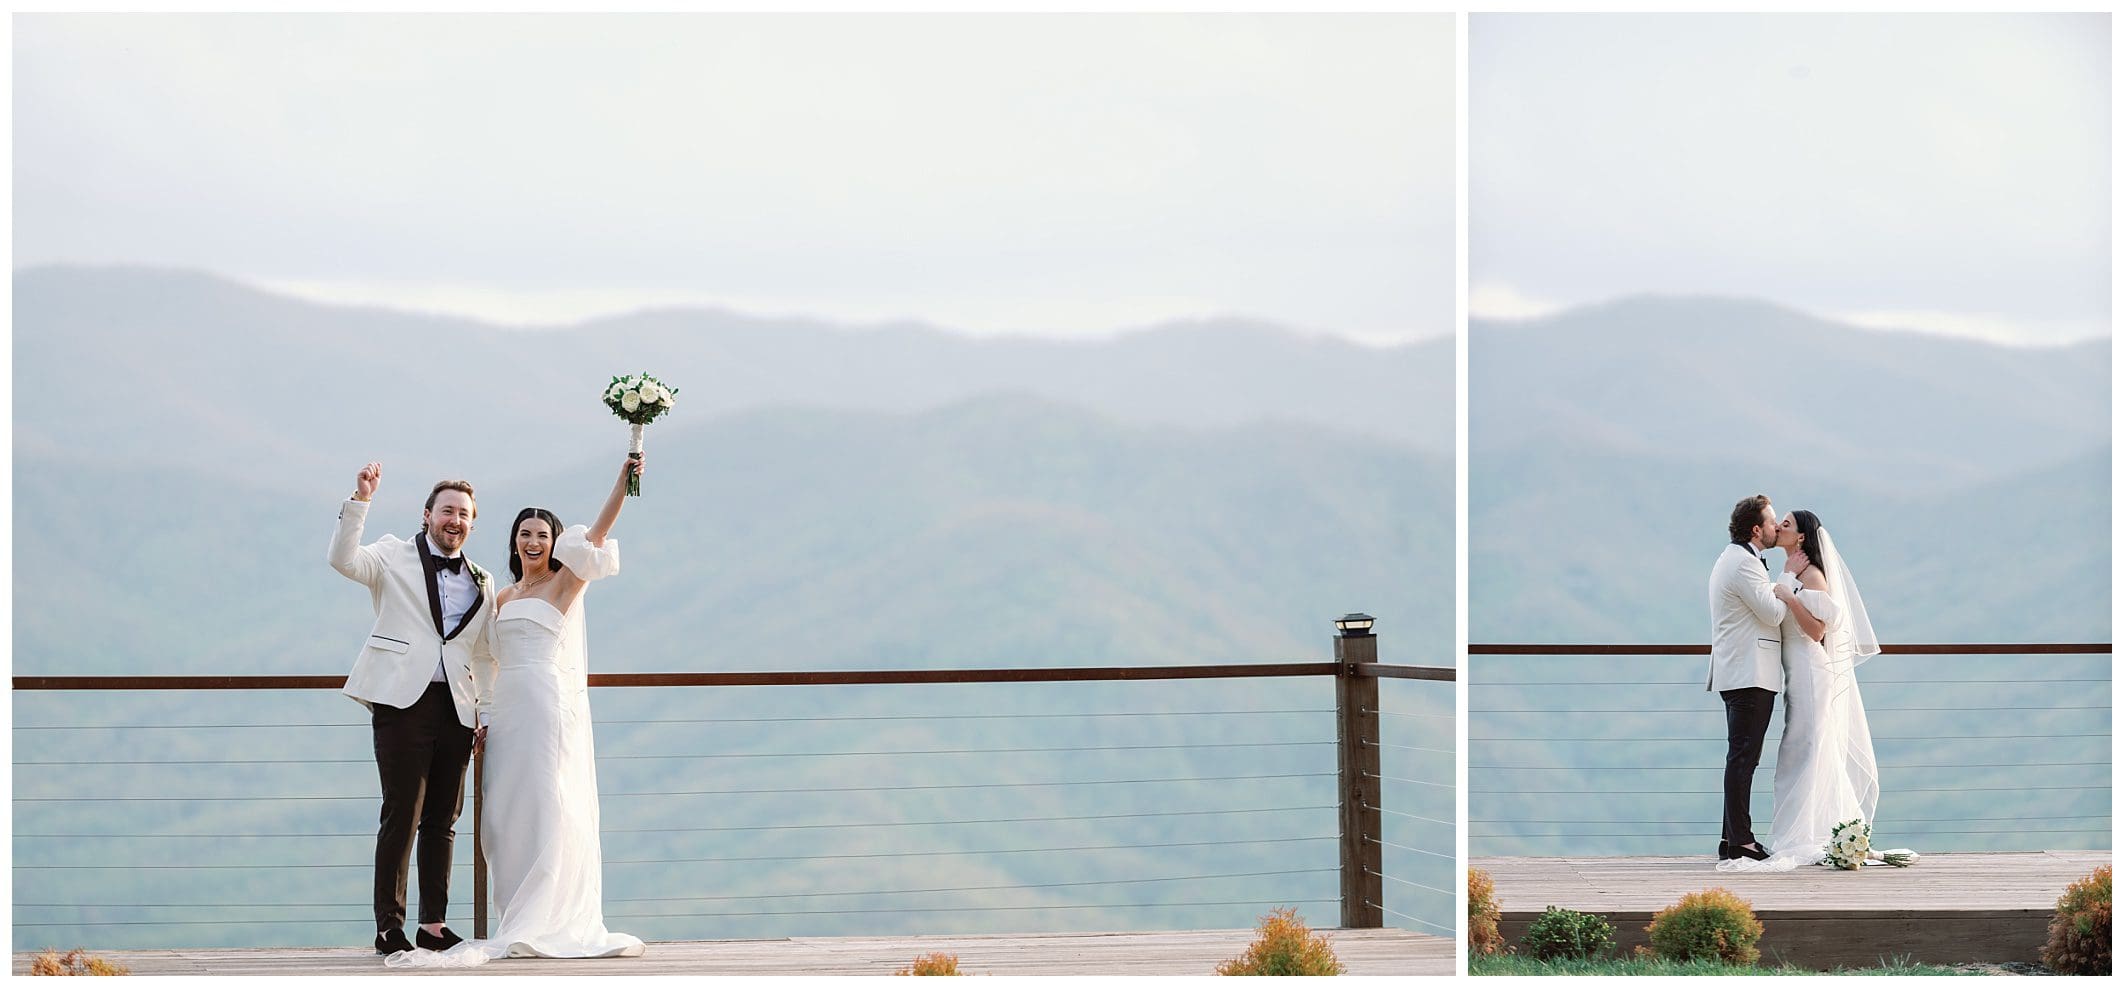 A bride and groom celebrating on a deck with mountain views; one image shows them cheering and the other kissing.